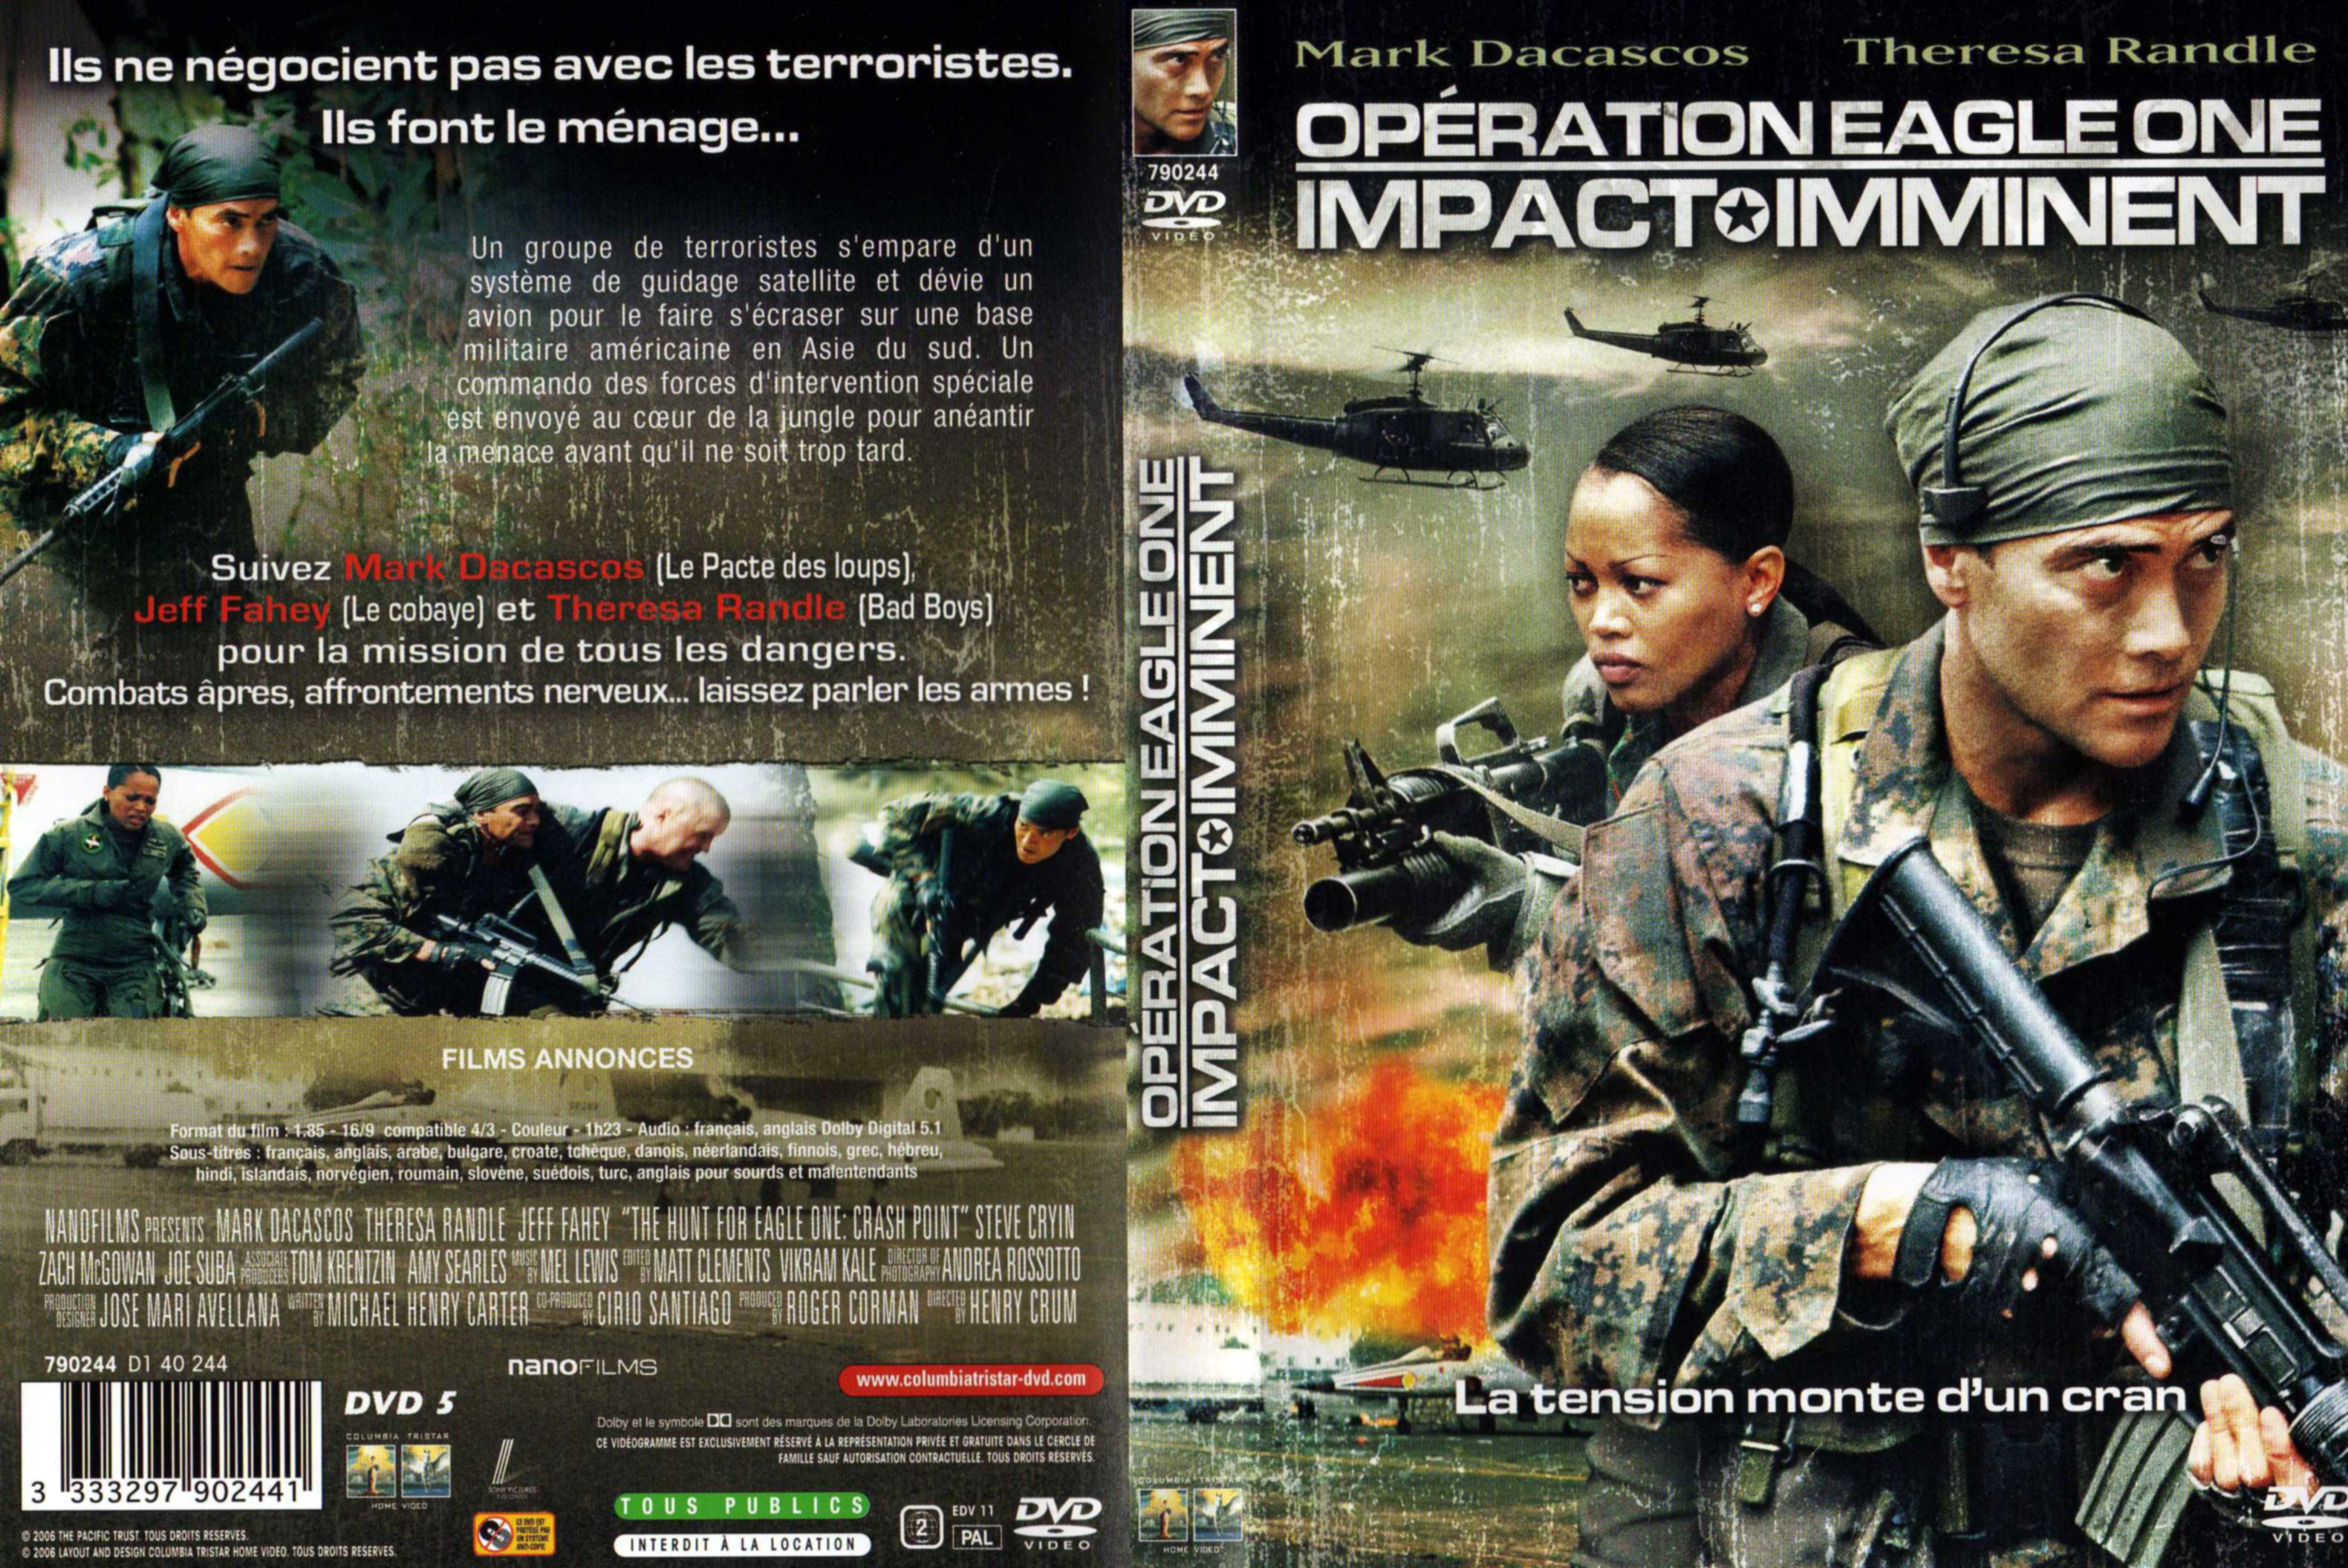 Jaquette DVD Operation eagle one - impact imminent v2